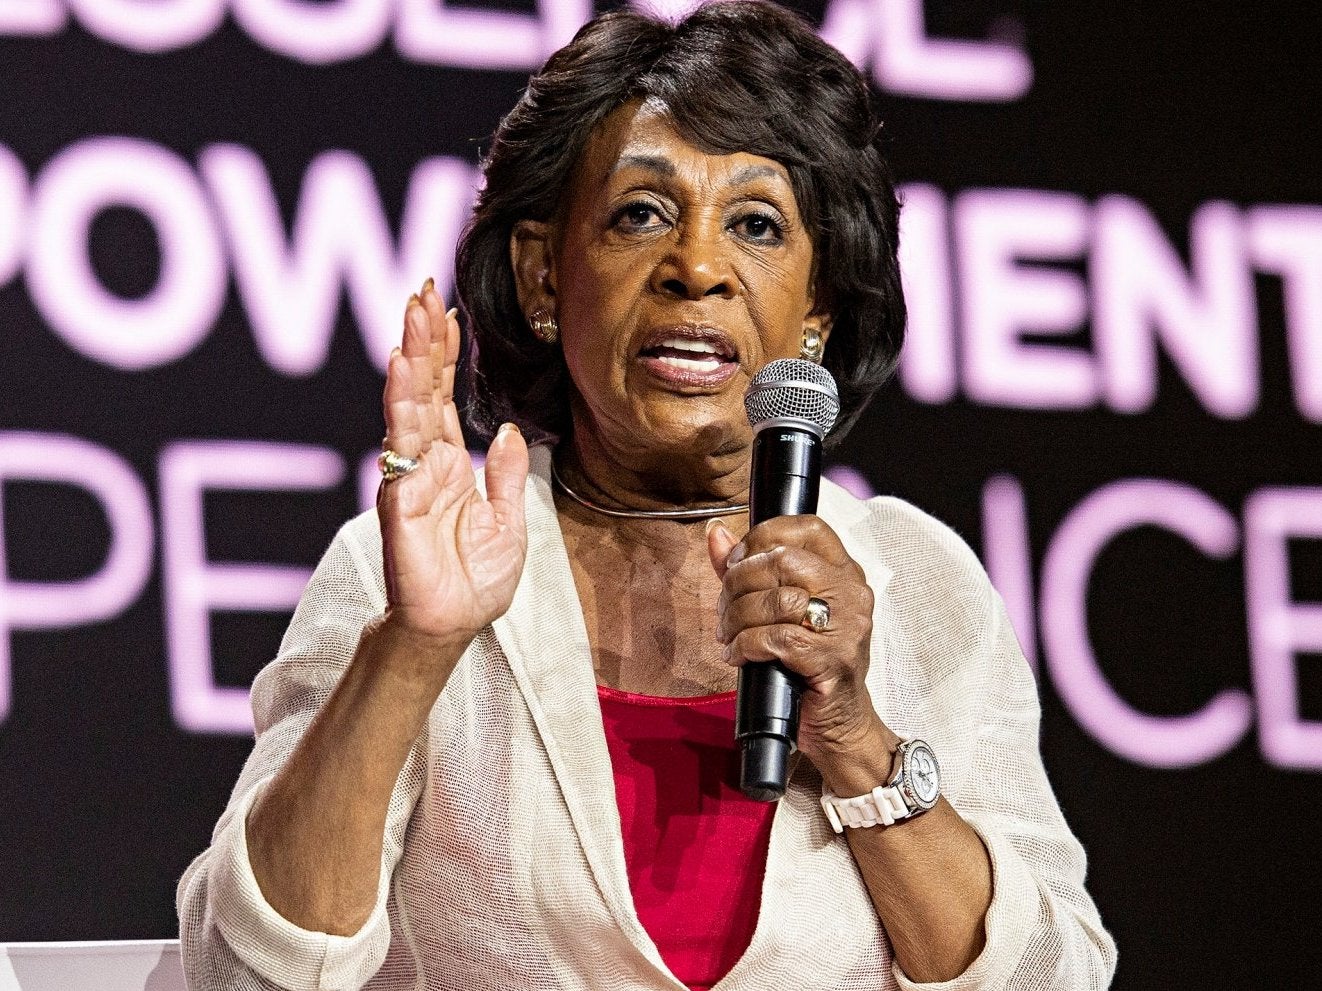 Maxine Waters at a rally in California